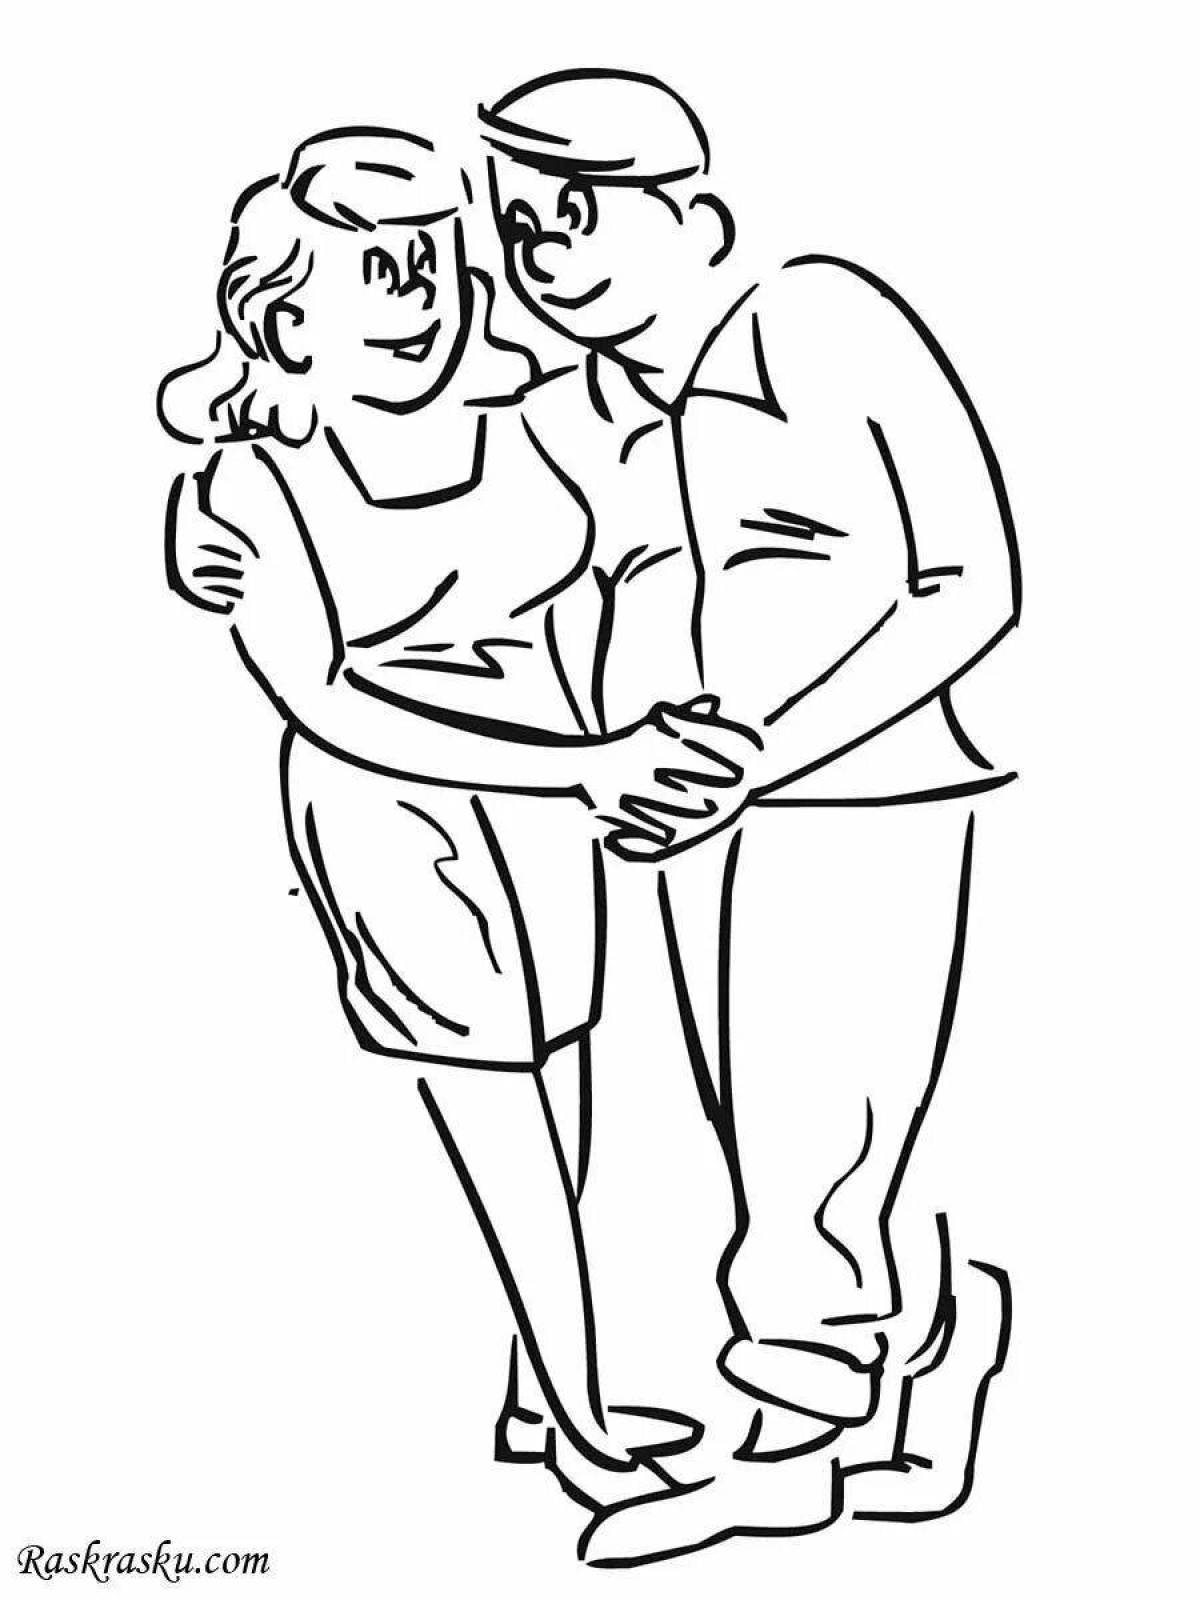 Harmonious wife and husband coloring page